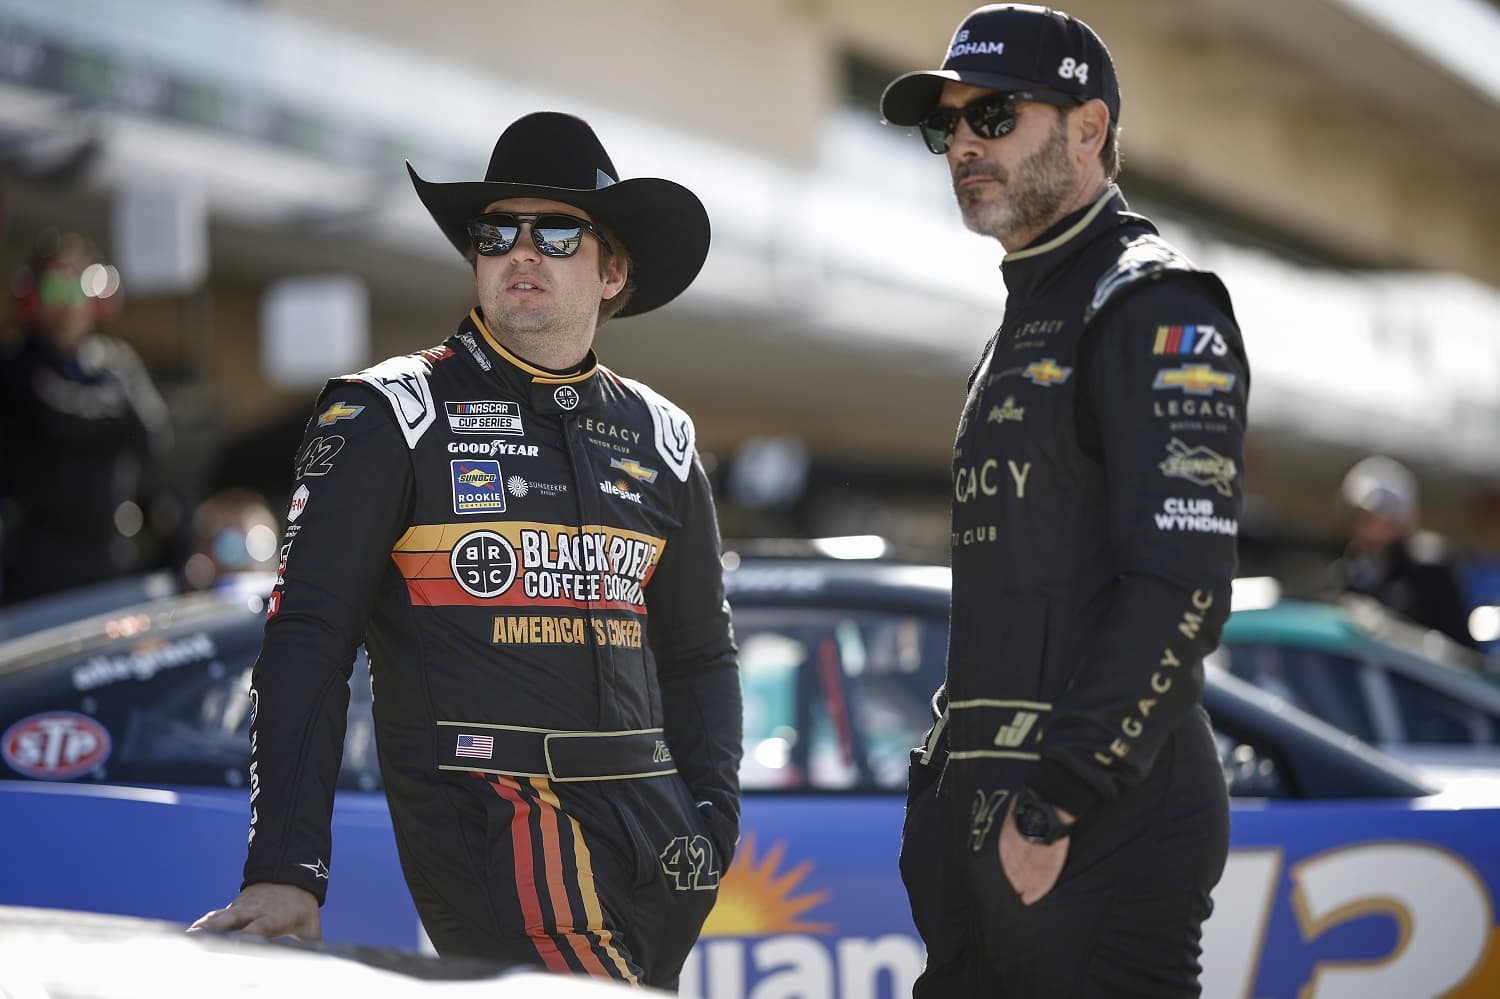 Noah Gragson and Jimmie Johnson of Legacy Motor Club look on in the garage area during qualifying for the NASCAR Cup Series EchoPark Automotive Grand Prix at Circuit of The Americas on March 25, 2023 in Austin, Texas. | Chris Graythen/Getty Images